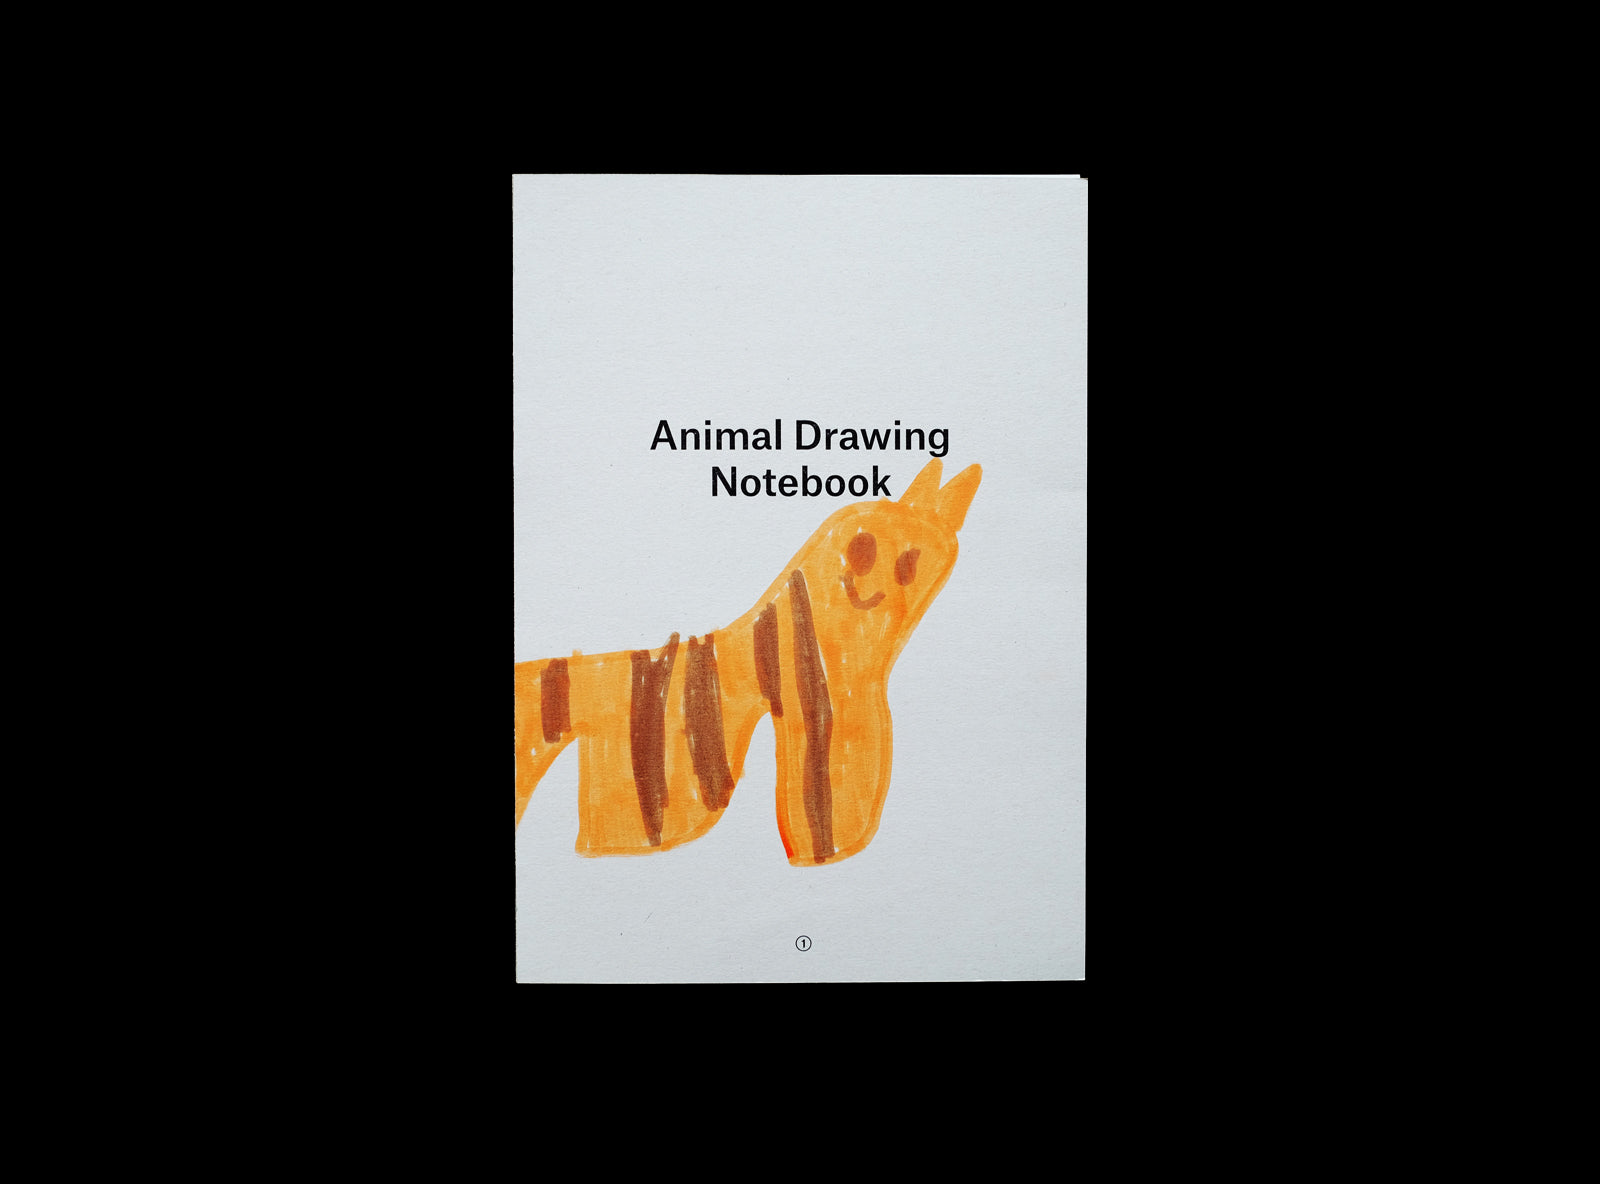 Cover of animal drawing notebook with a kid's drawing: tiger